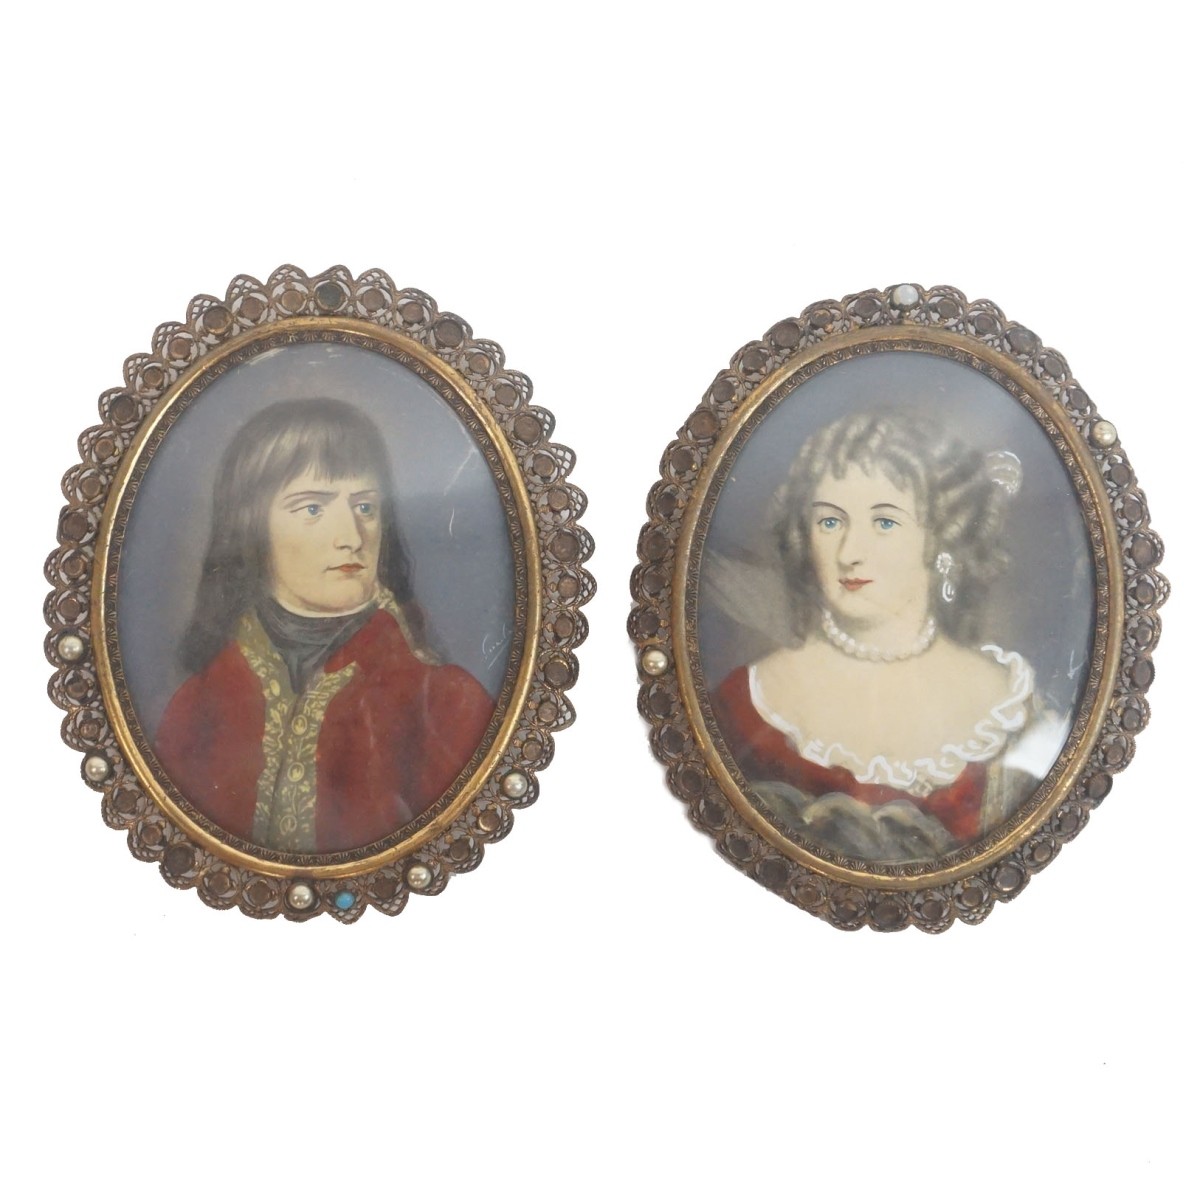 Pair of Miniatures on Celluloid